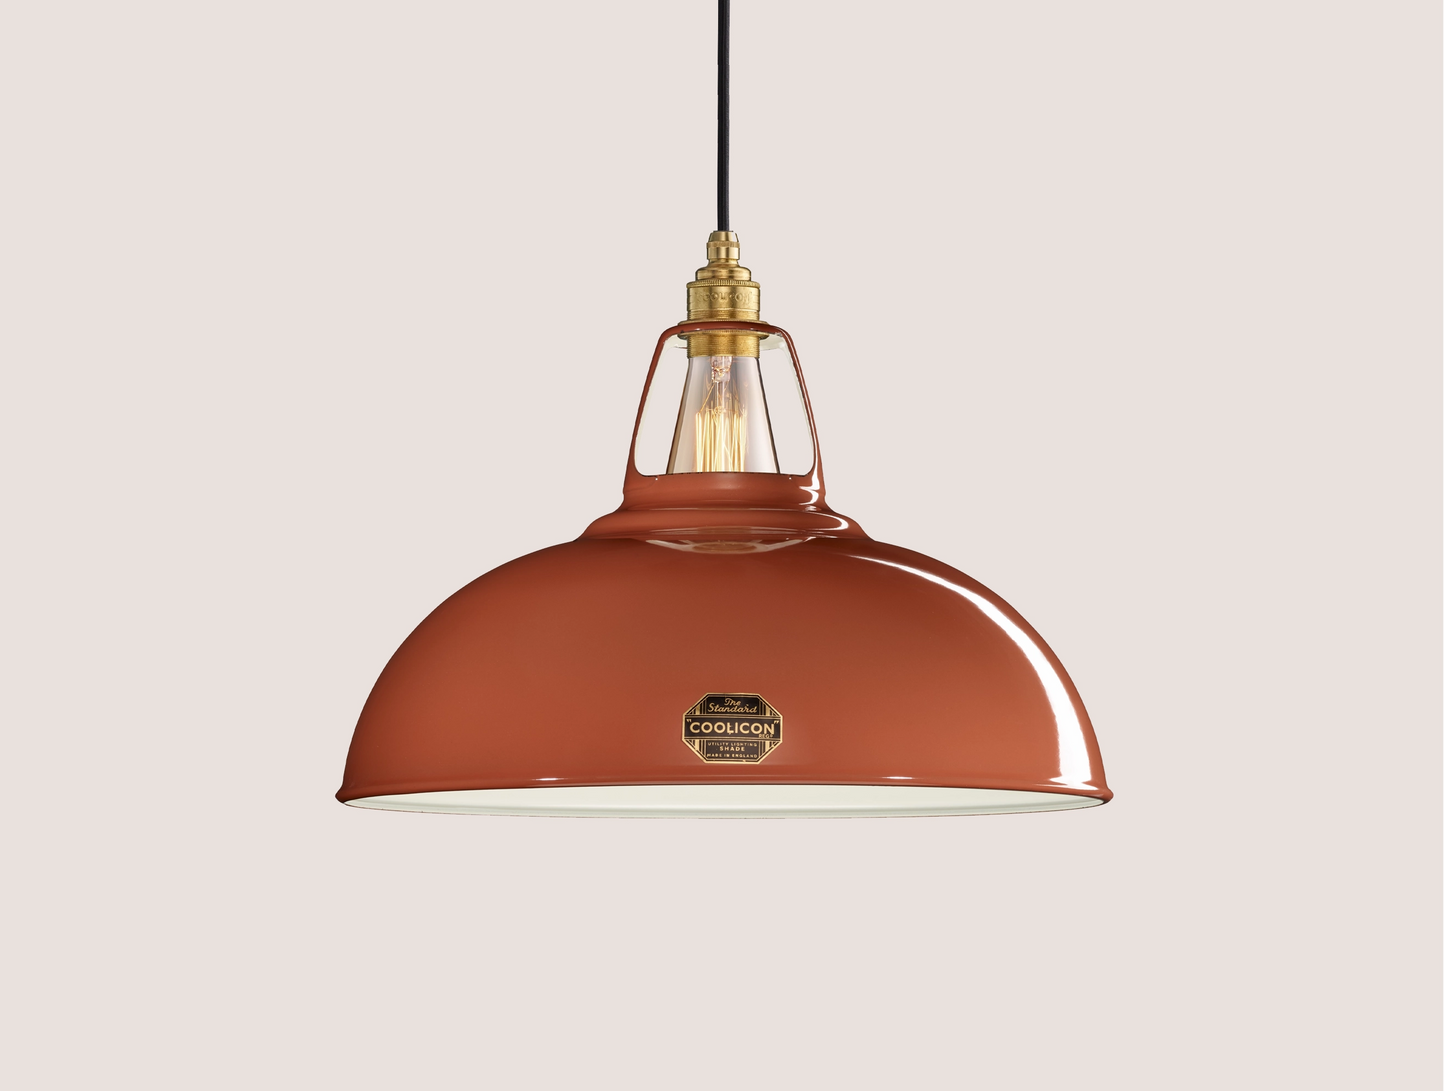 Large Terracotta Coolicon lampshade with a Porcelain pendant set over a light teal background